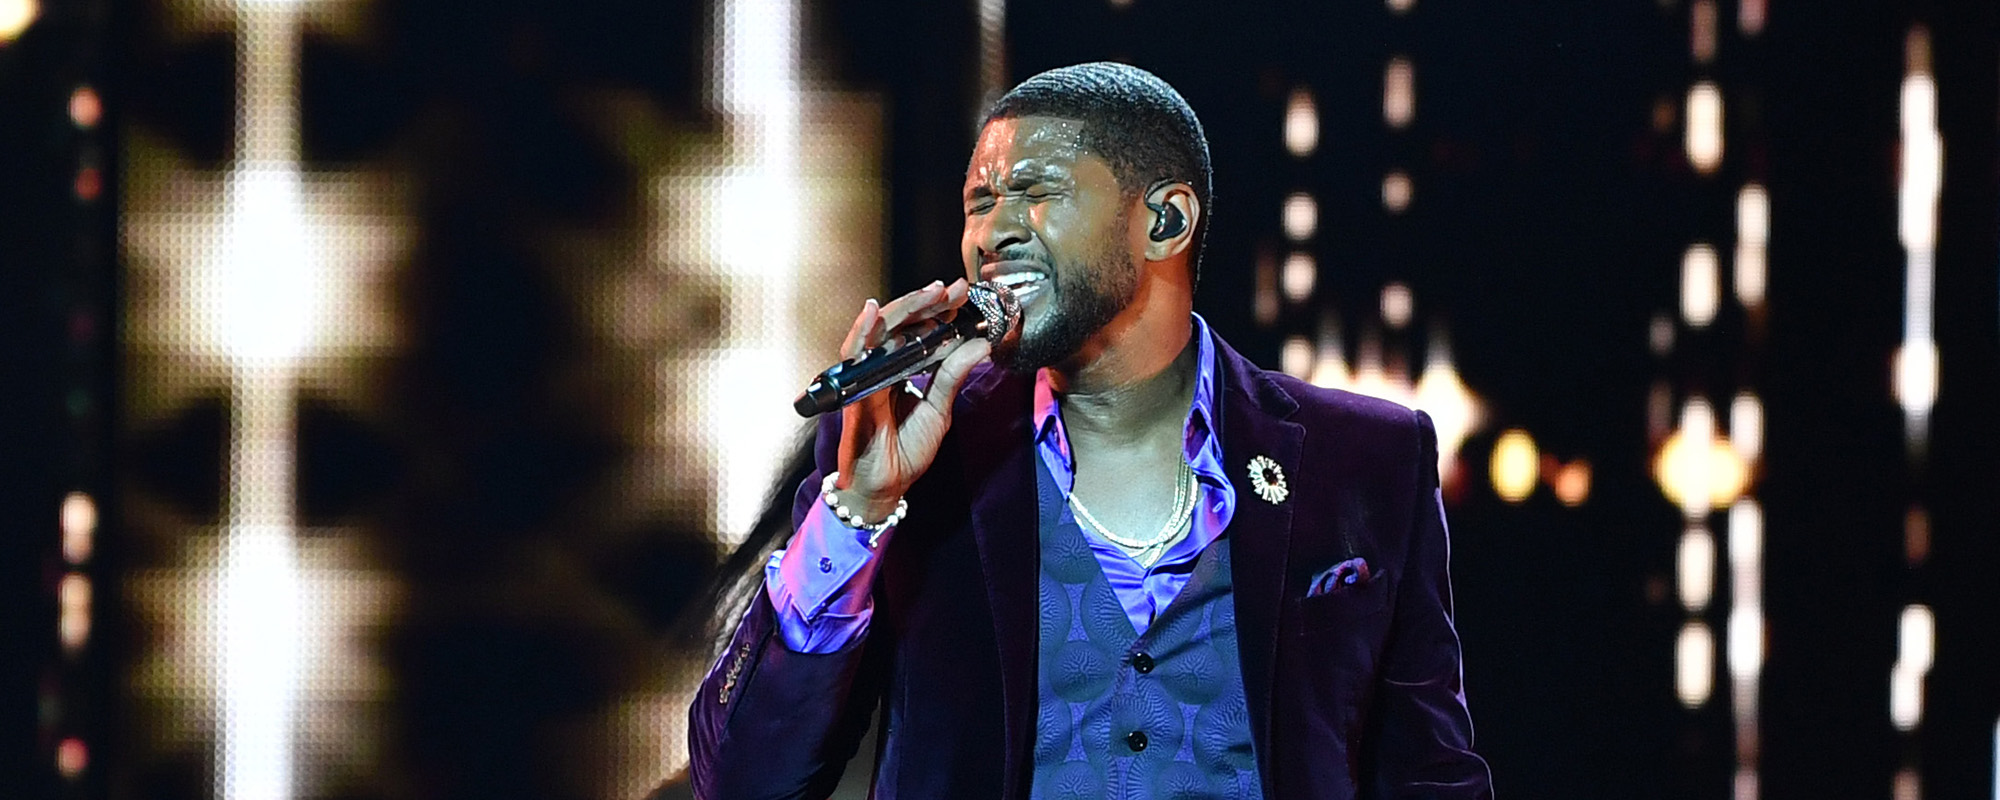 Behind the Meaning of Usher’s Defining Song “Yeah!”